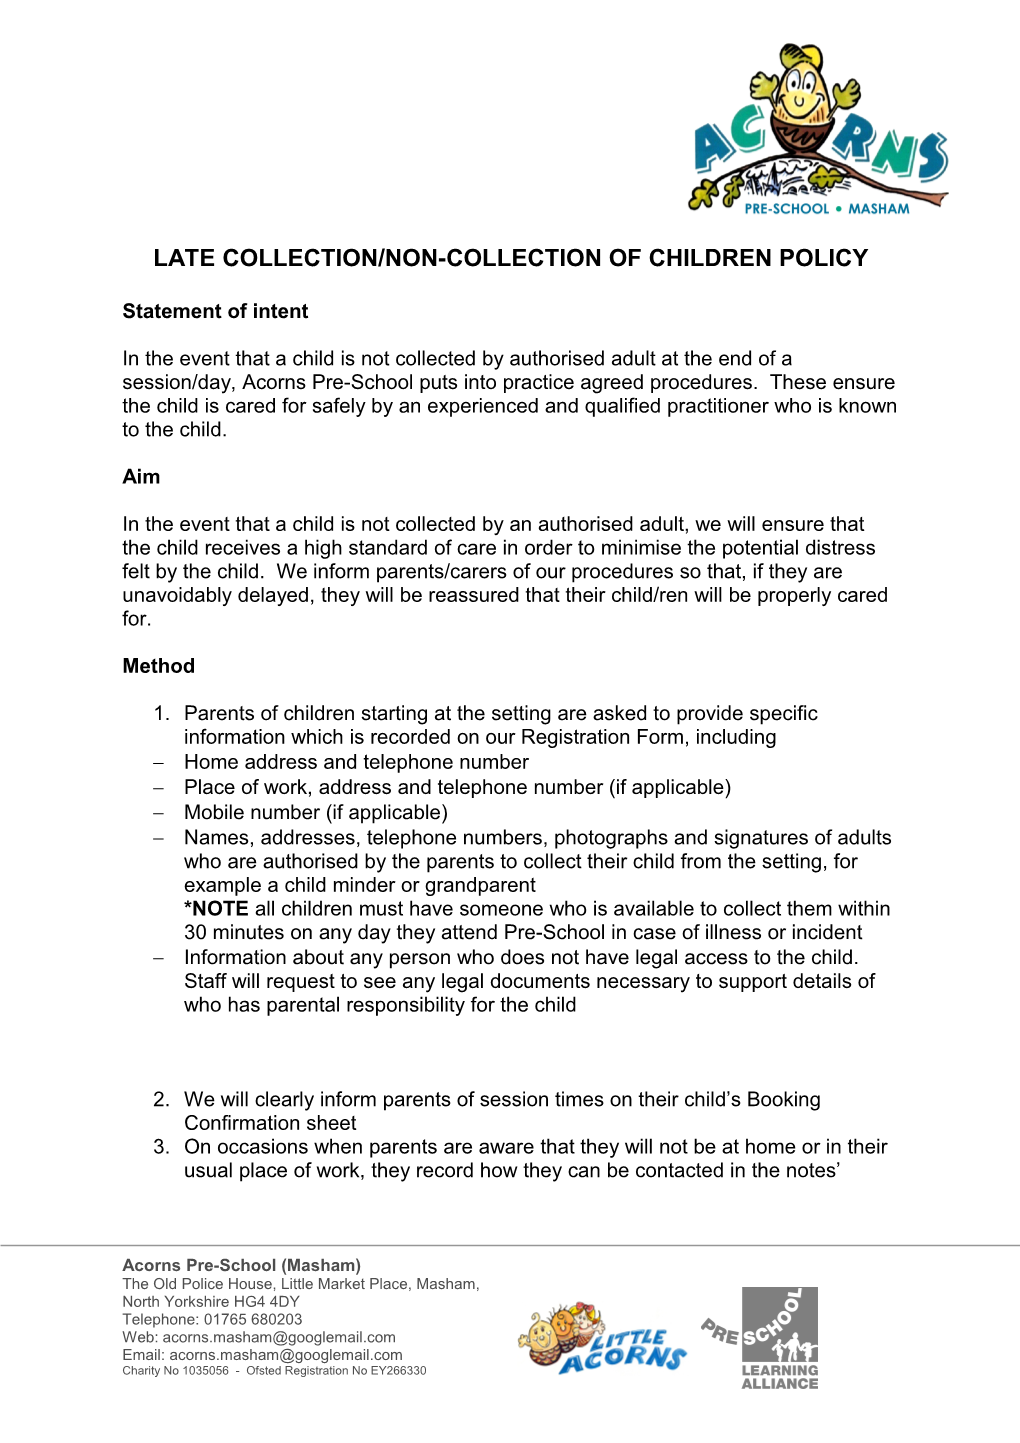 Late Collection/Non-Collection of Children Policy